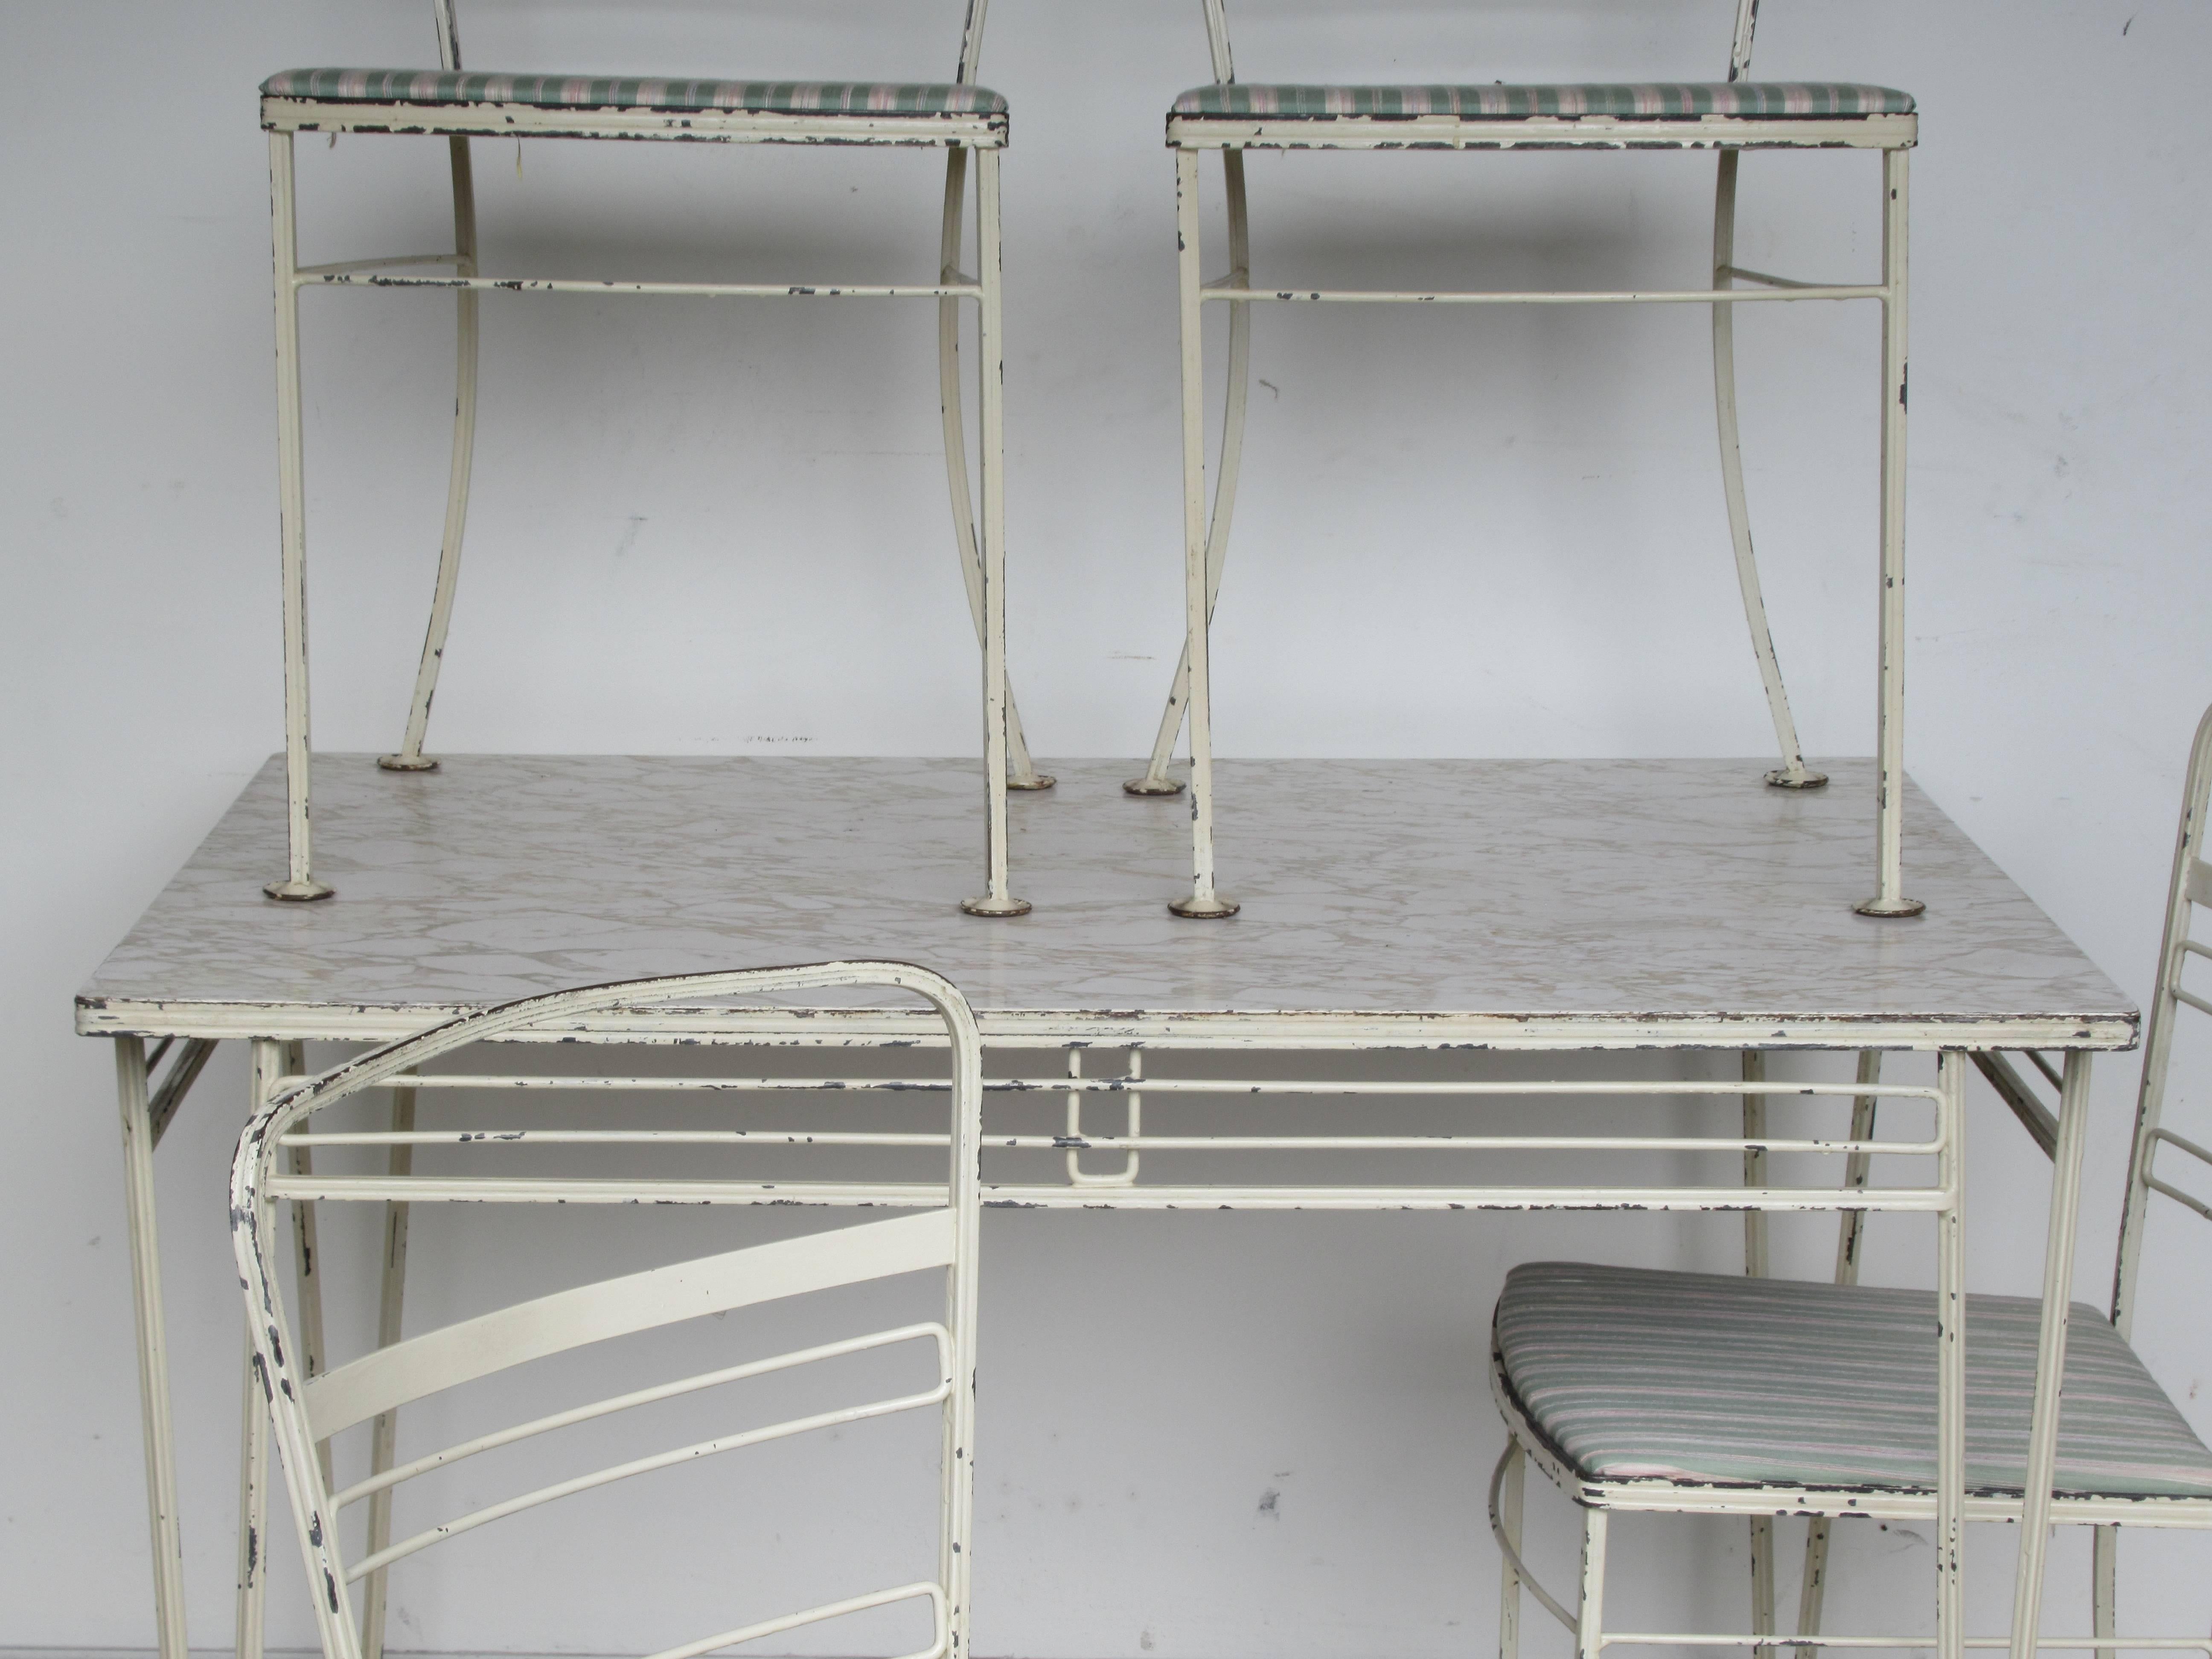 Mid-20th century modernist wrought iron patio set consisting of four chairs and one table. All pieces with very fine precisely detailed metalwork in old worn white painted surface.. A great looking hard to find early set attributed to John